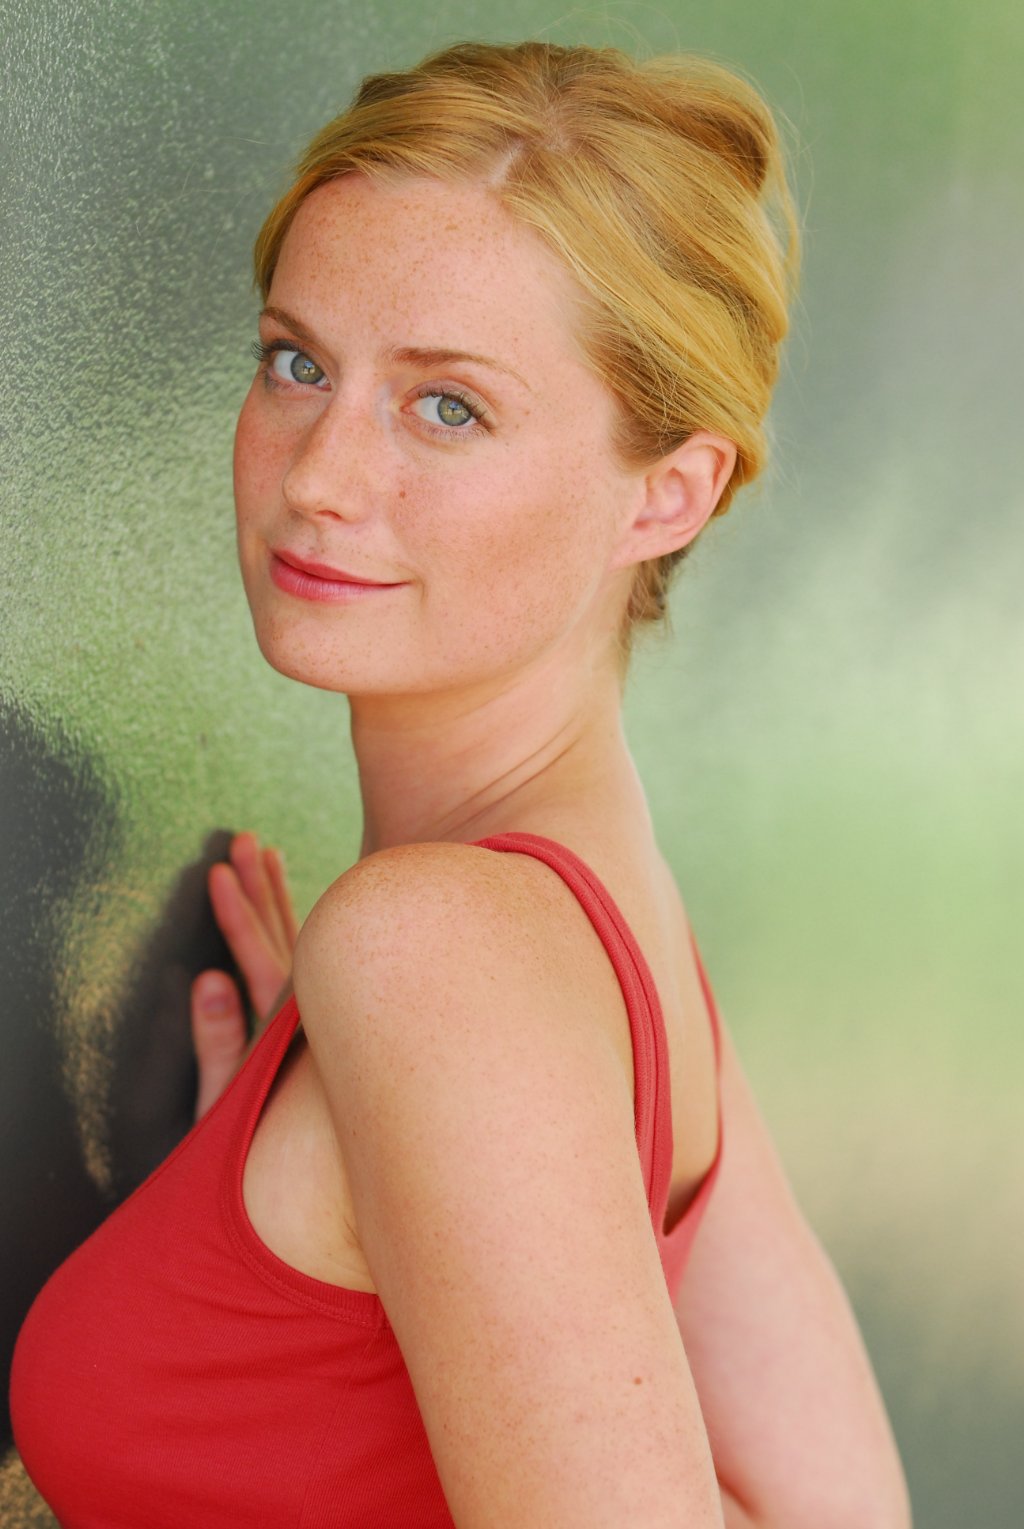 Norby actress kate Kate Norby